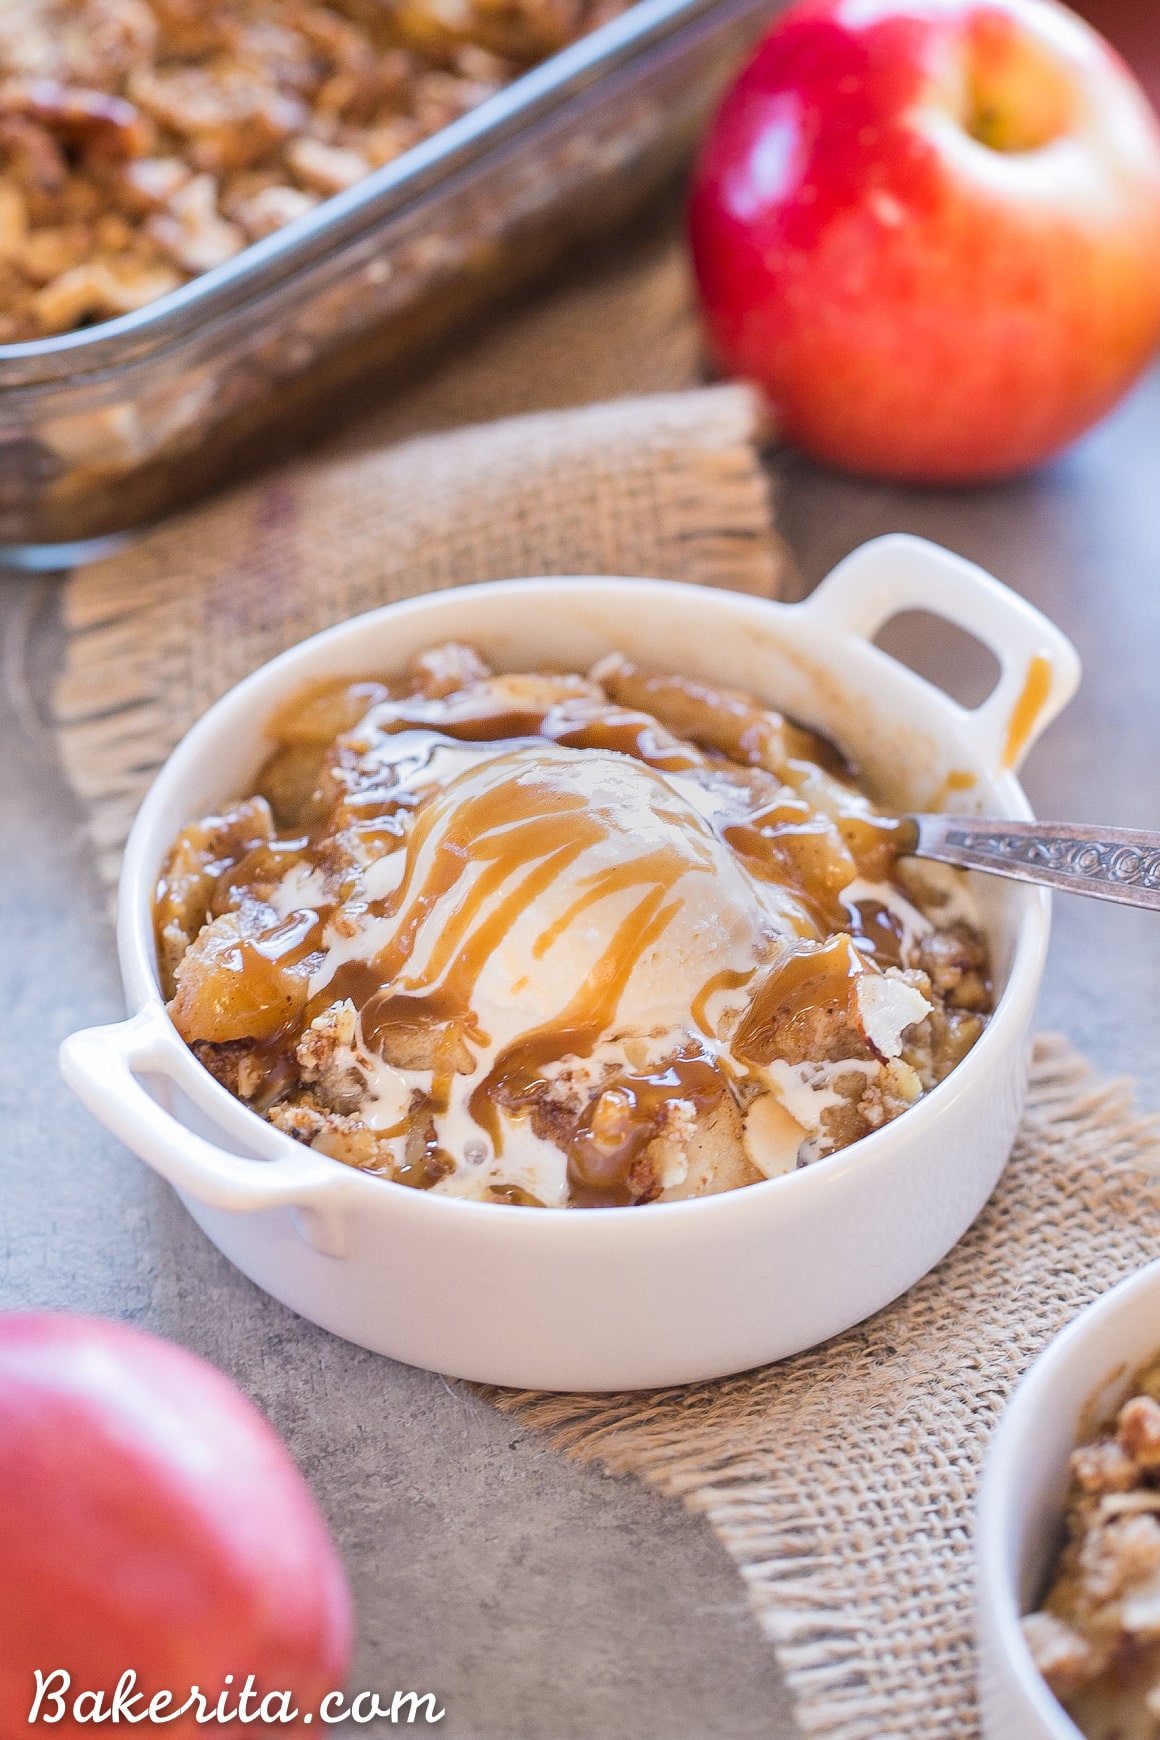 This Pear Apple Crisp combines two of the best fall fruits into one delicious crisp, flavored with vanilla, cinnamon and ginger and topped with a grain-free crumble topping. This crisp is gluten-free, Paleo, and vegan.